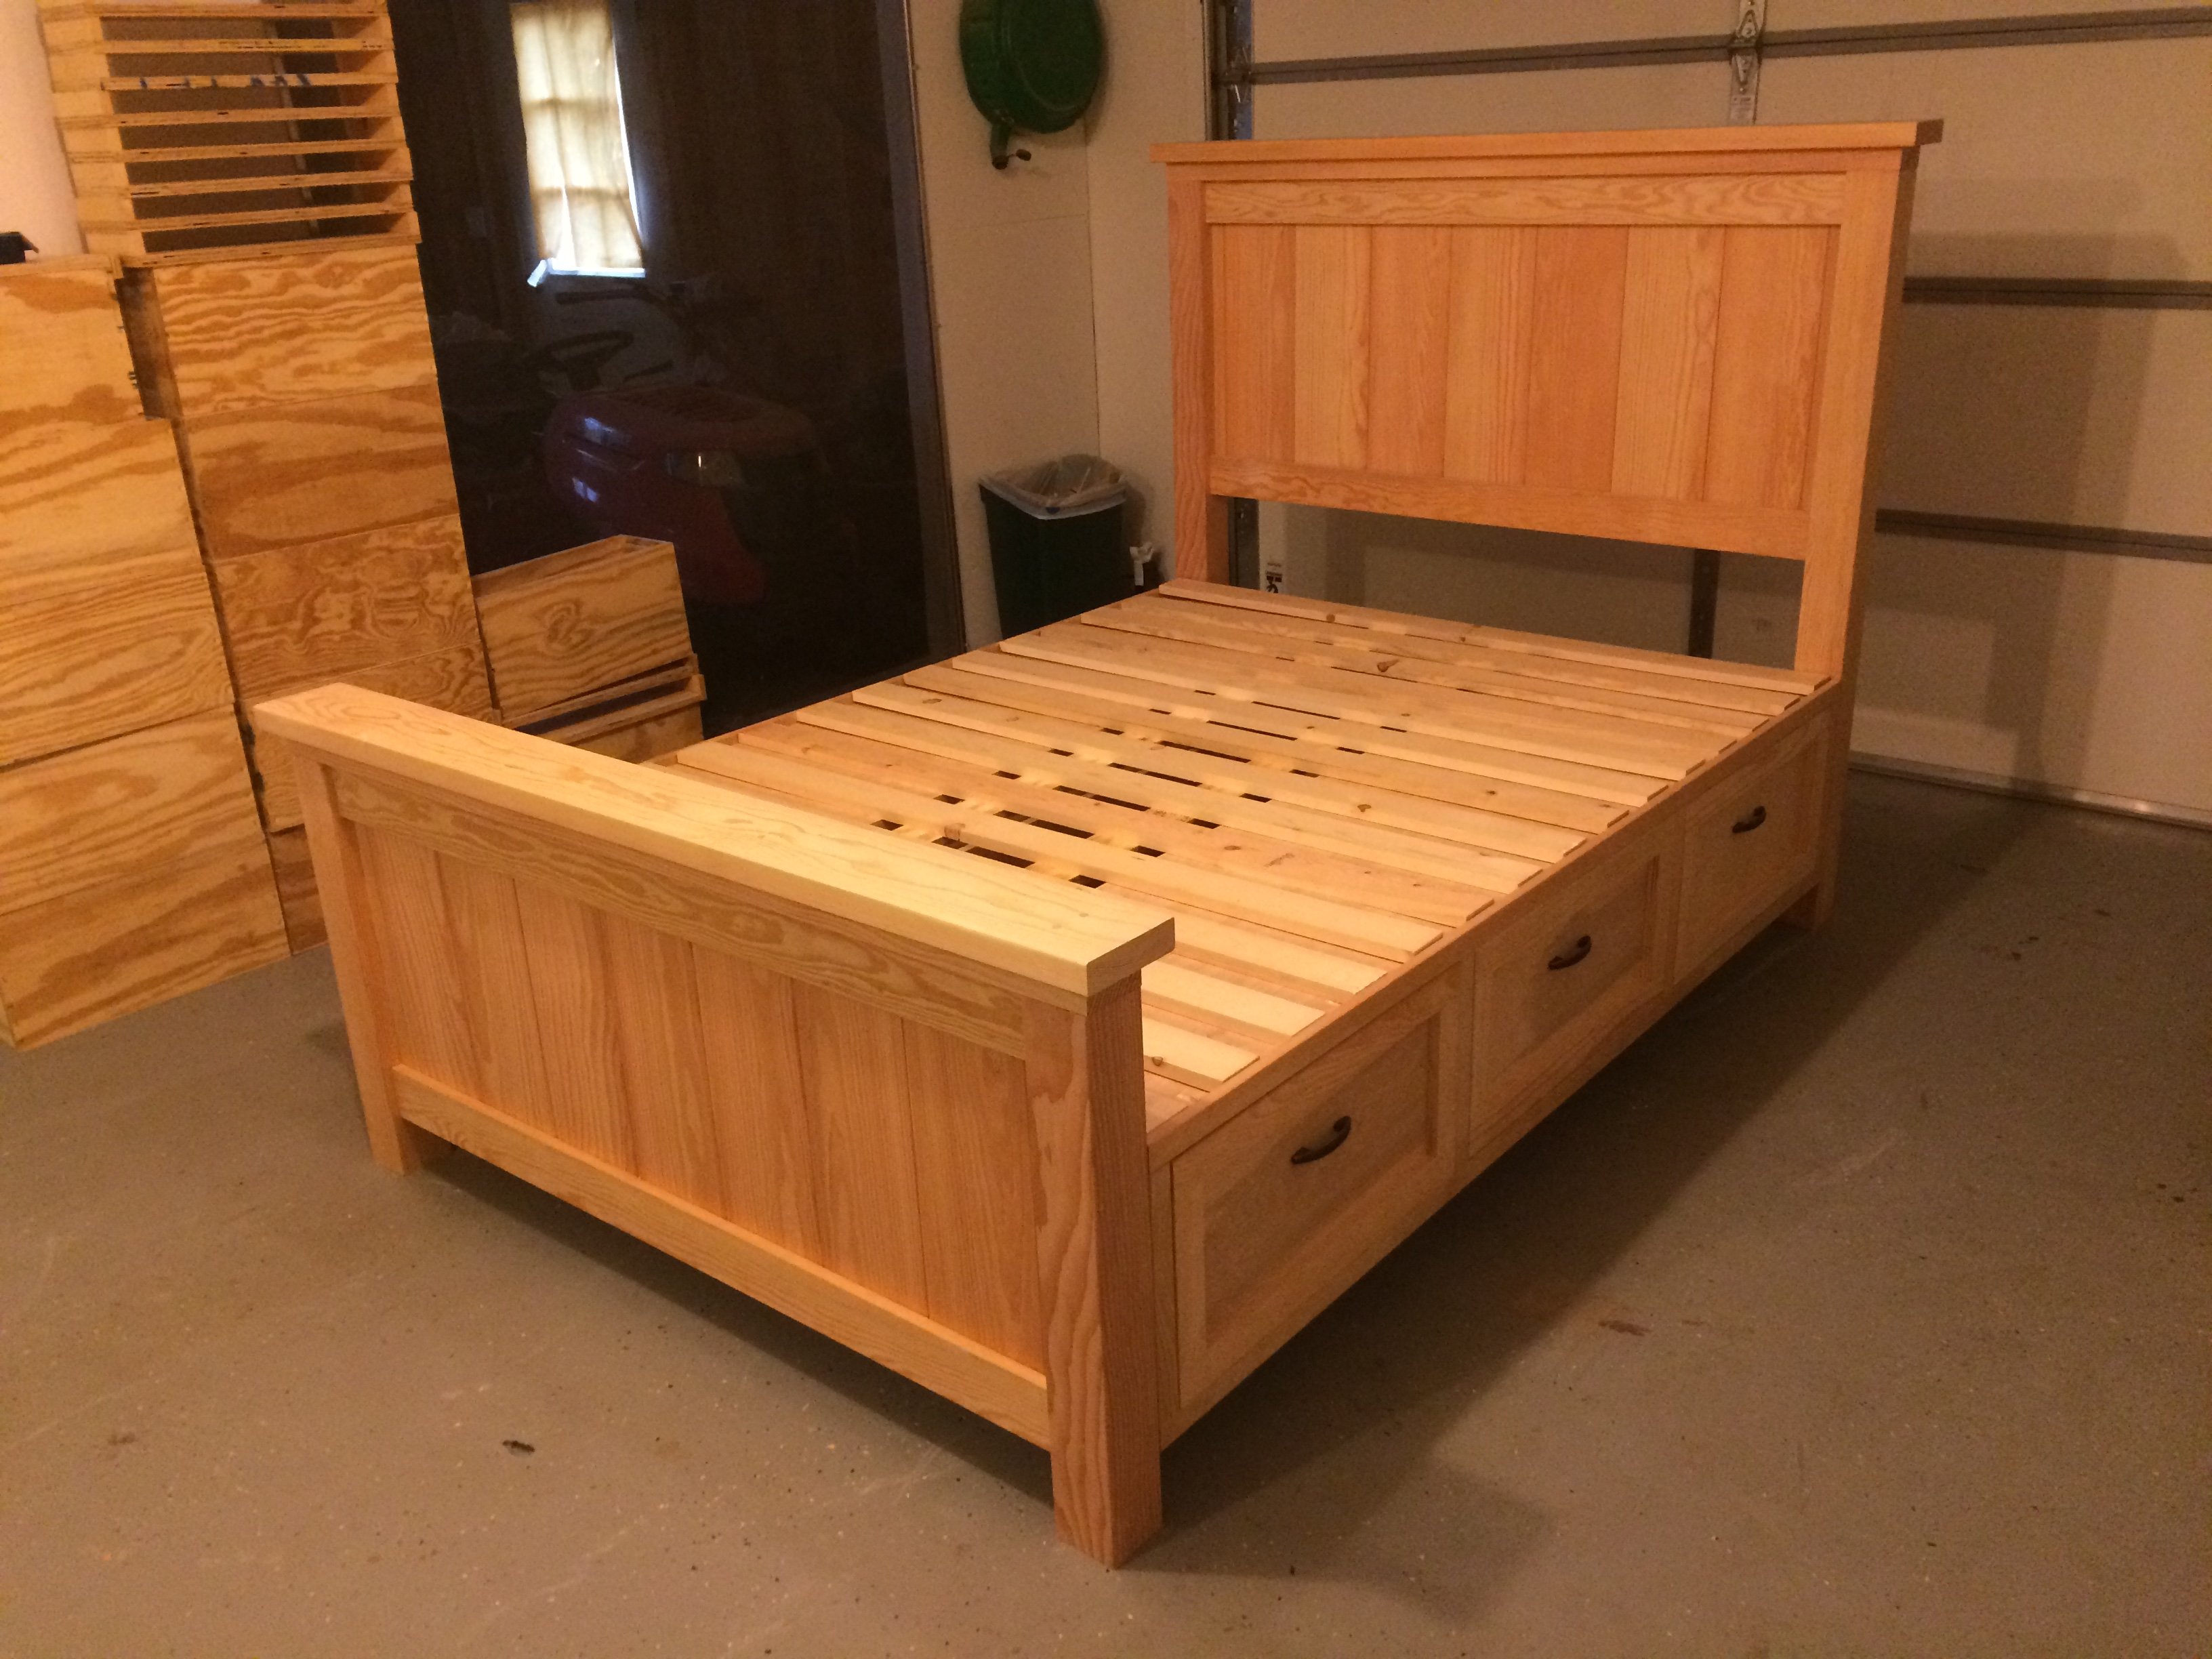 Farmhouse Storage Bed With Drawers, How To Build A Full Size Wooden Bed Frame